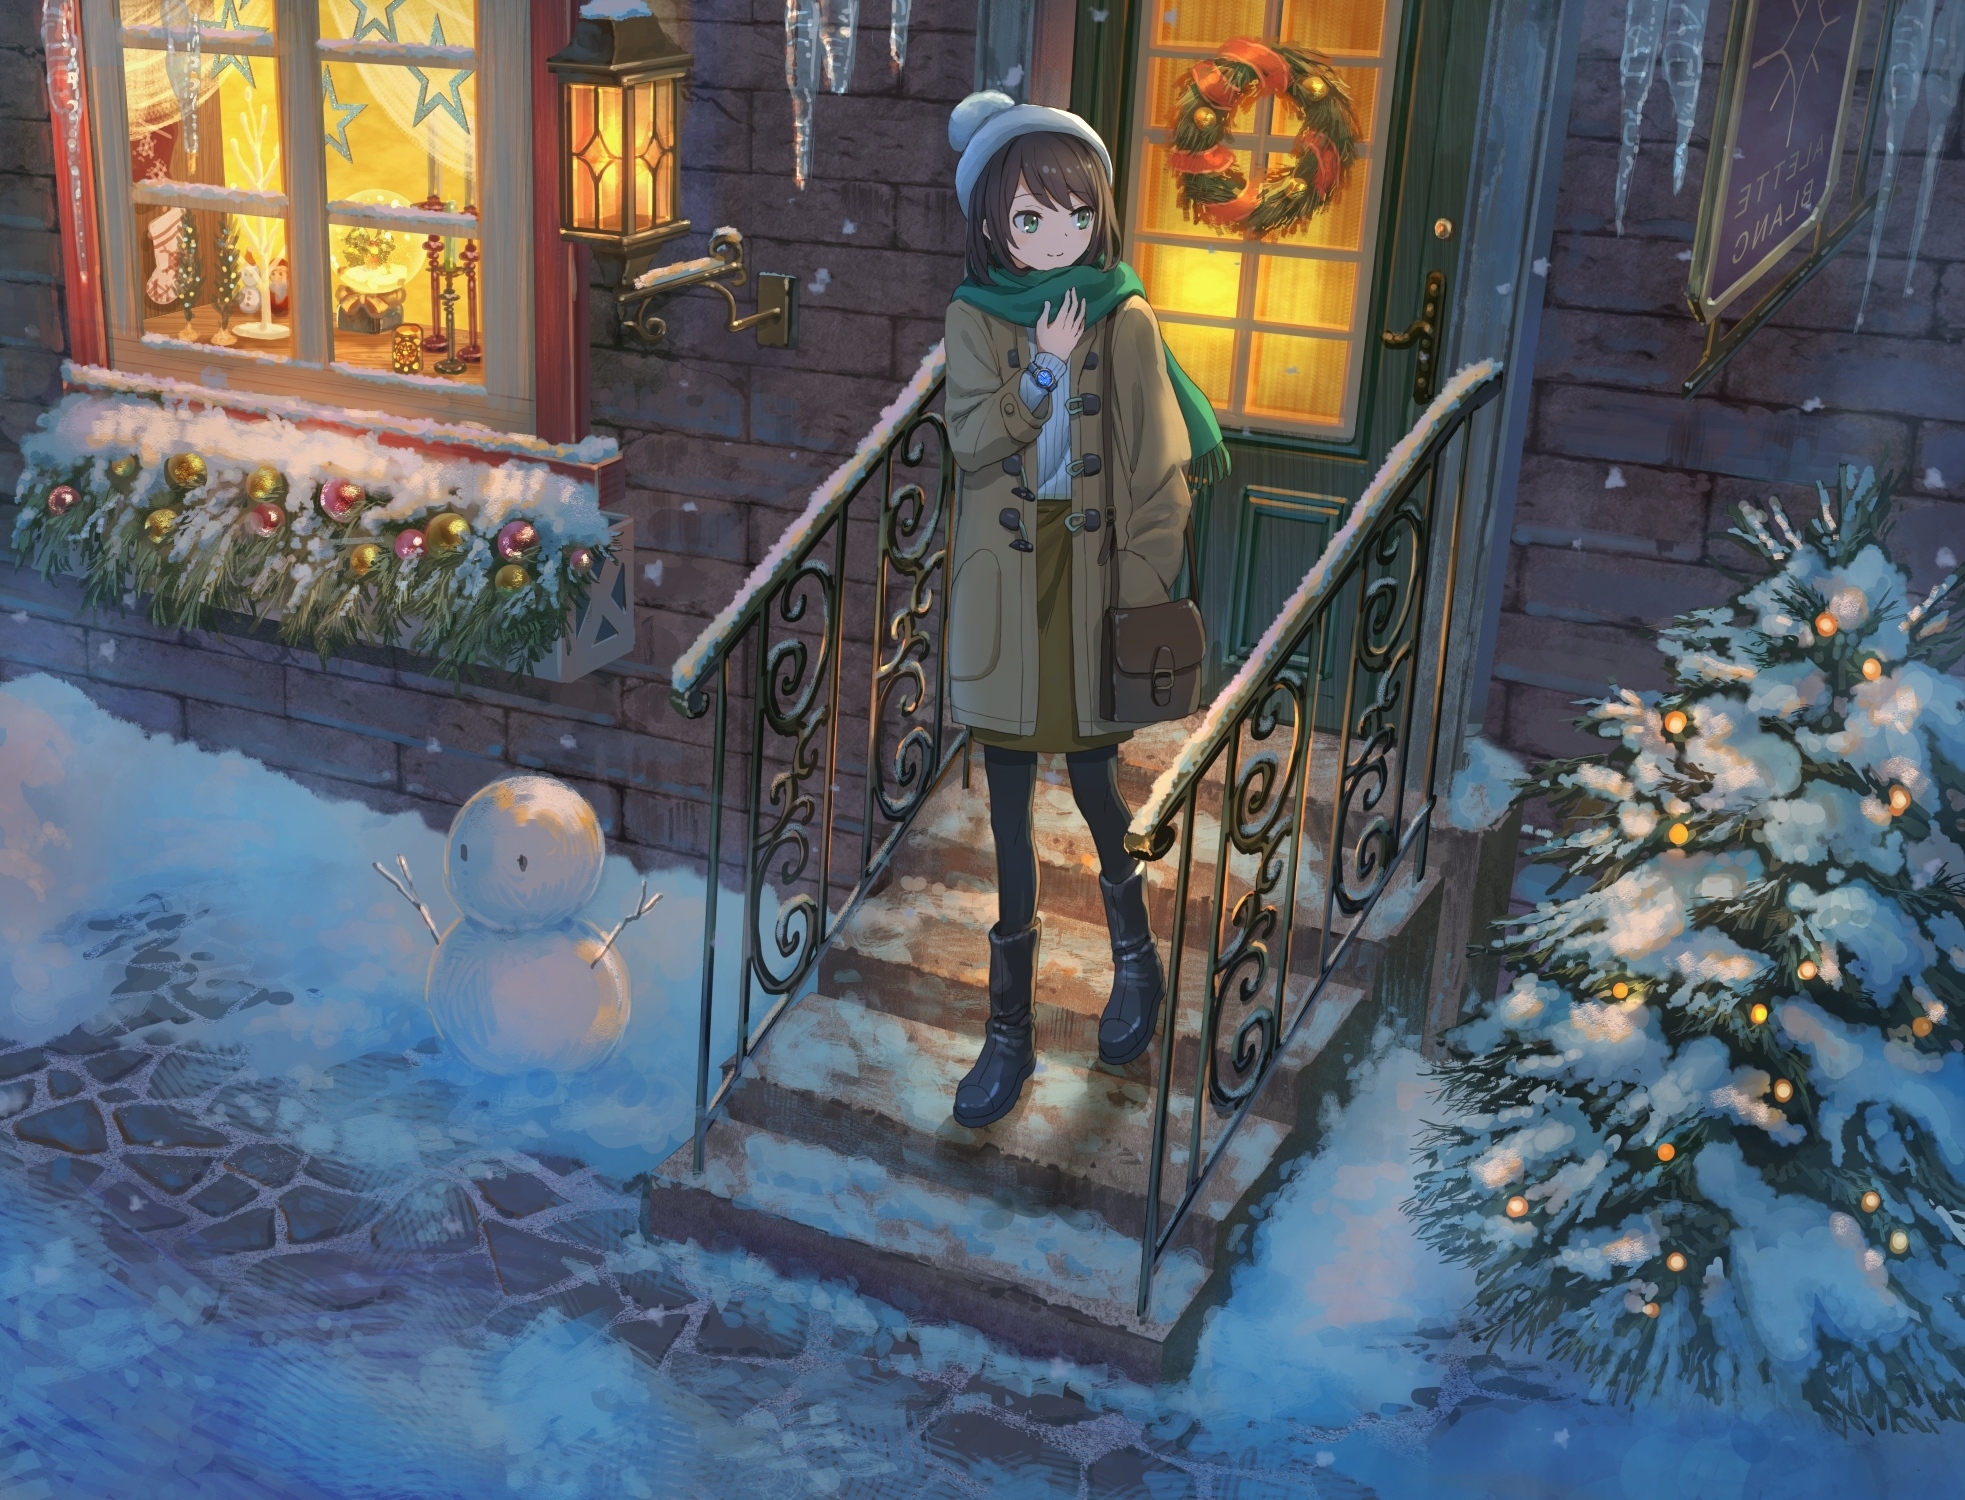 Download Gloomy Christmas Anime Pfp Of A Girl In Coat Wallpaper